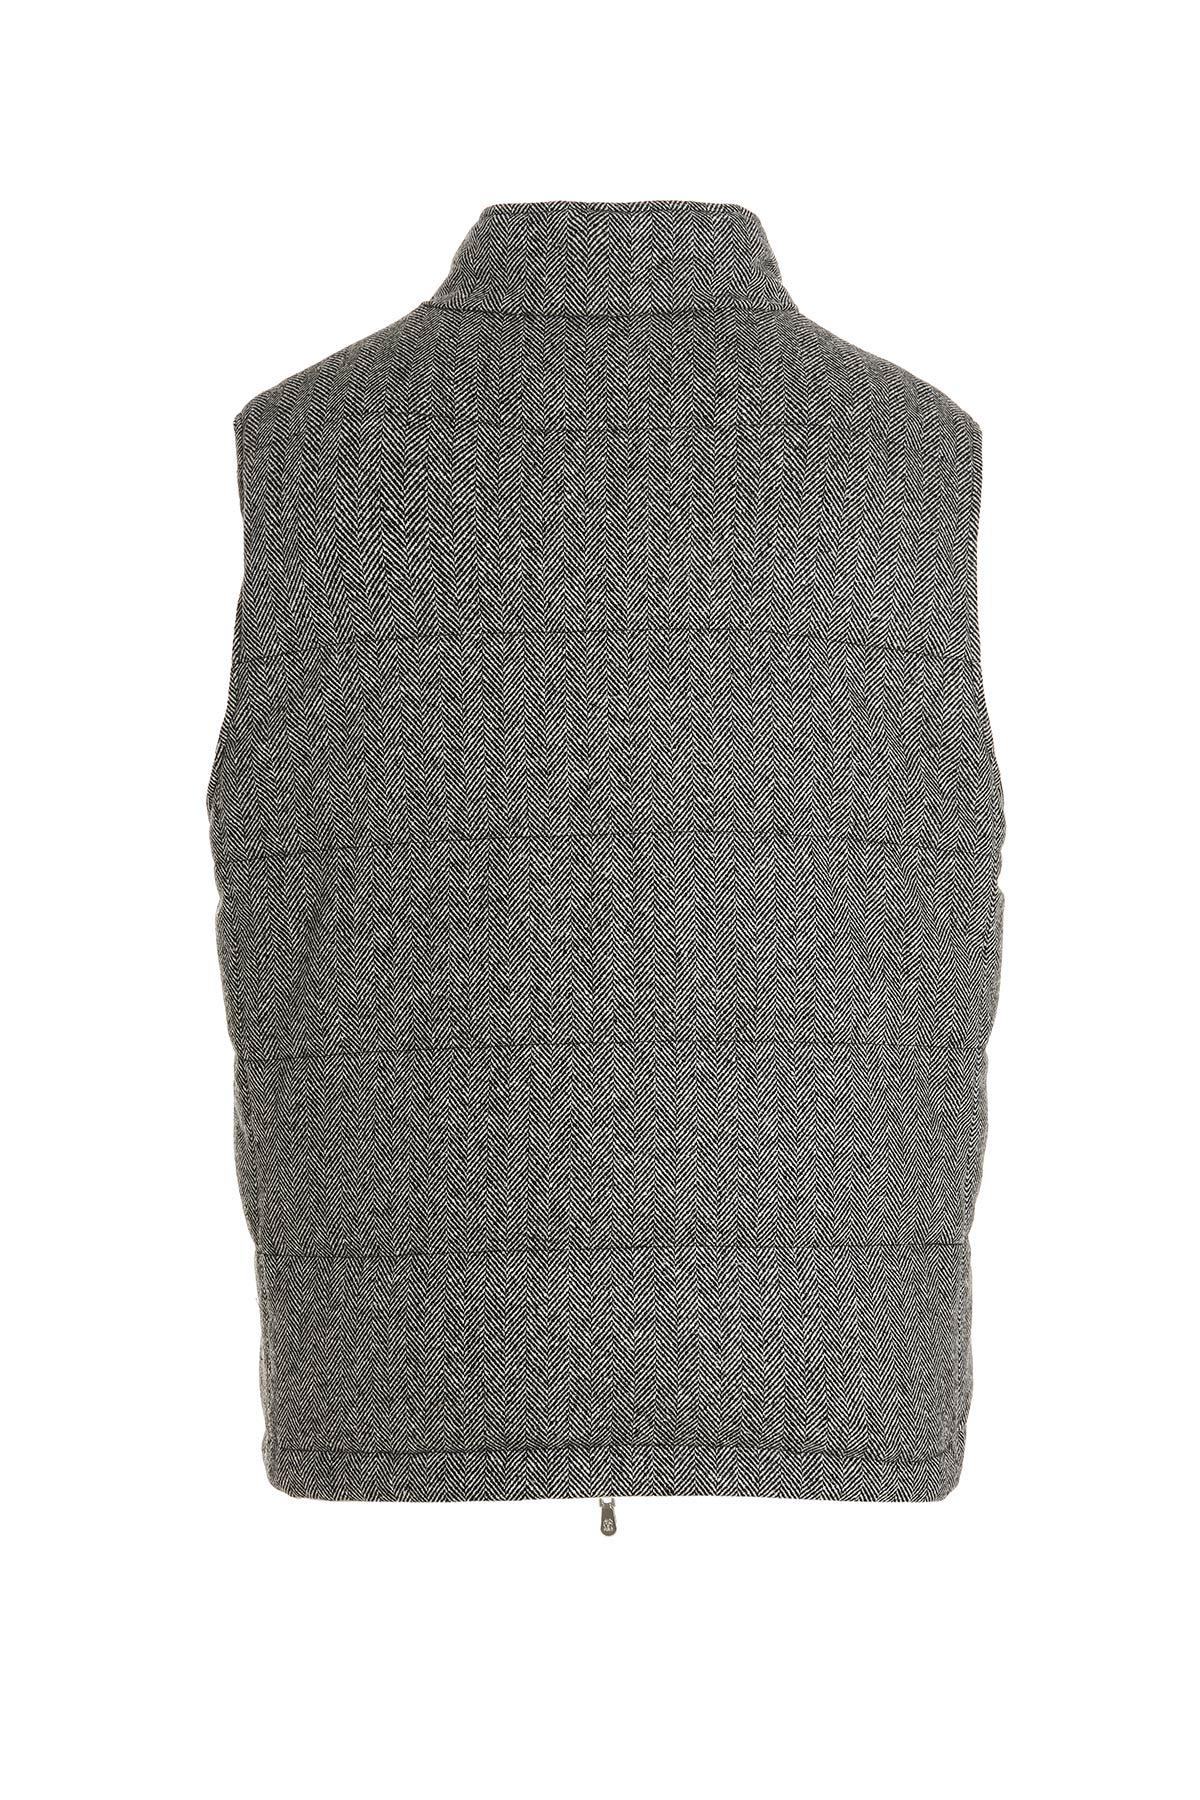 Mens Jackets Brunello Cucinelli Jackets Save 51% Brunello Cucinelli Reversible Wool And Nylon Sleeveless Jacket in Grey for Men 